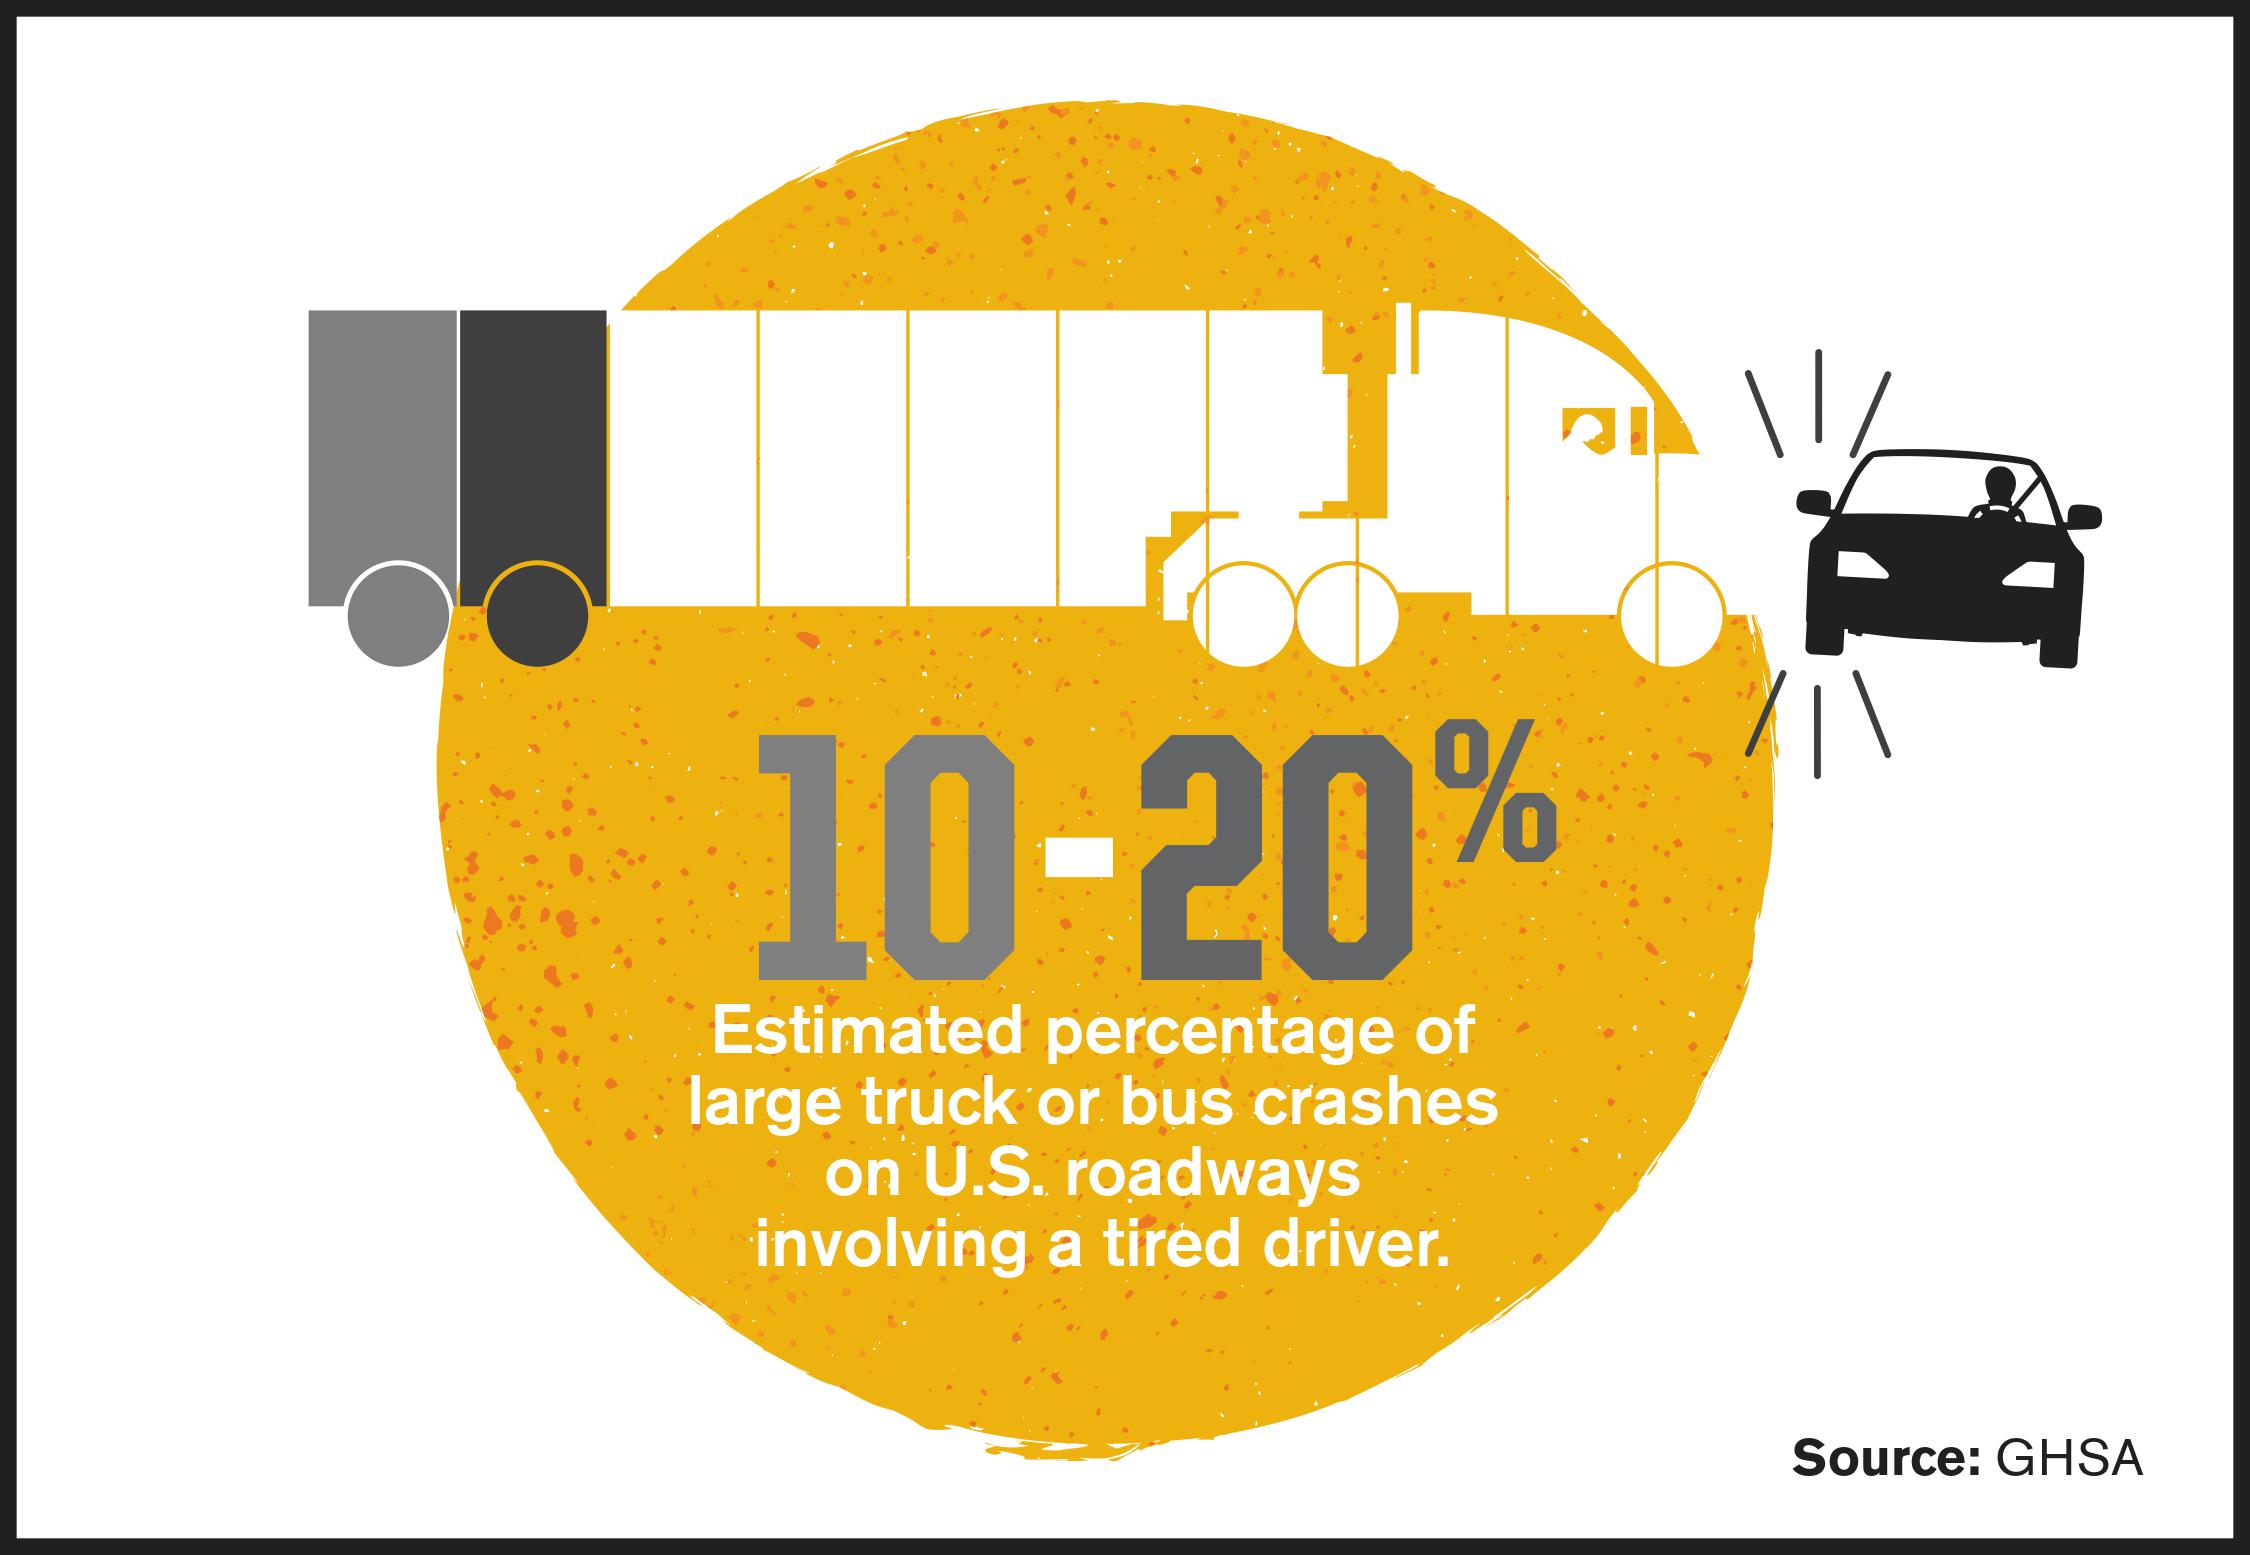 Estimated Percentage of Large Truck or Bus Crashes on U.S. Roadways Involving a Tired Driver